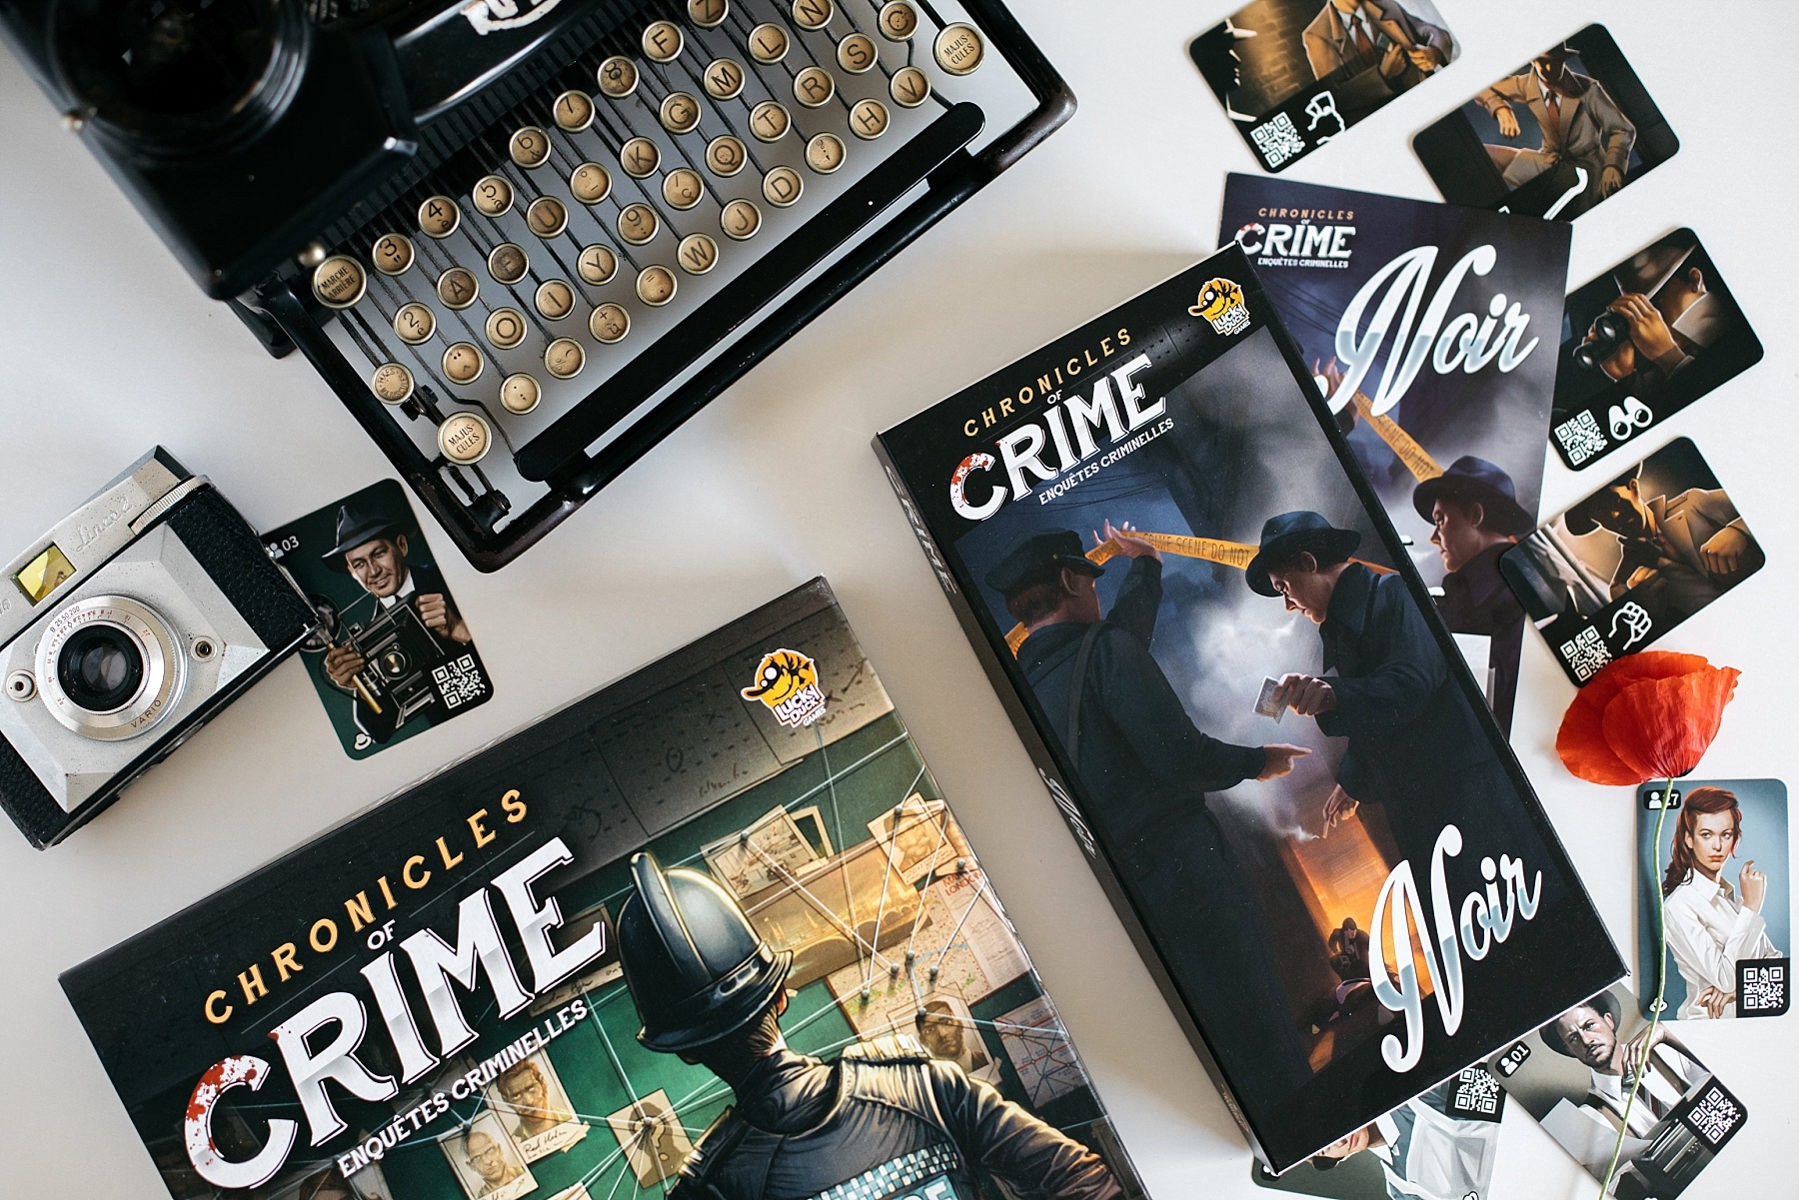 Chronicles of crime lucky duck games 